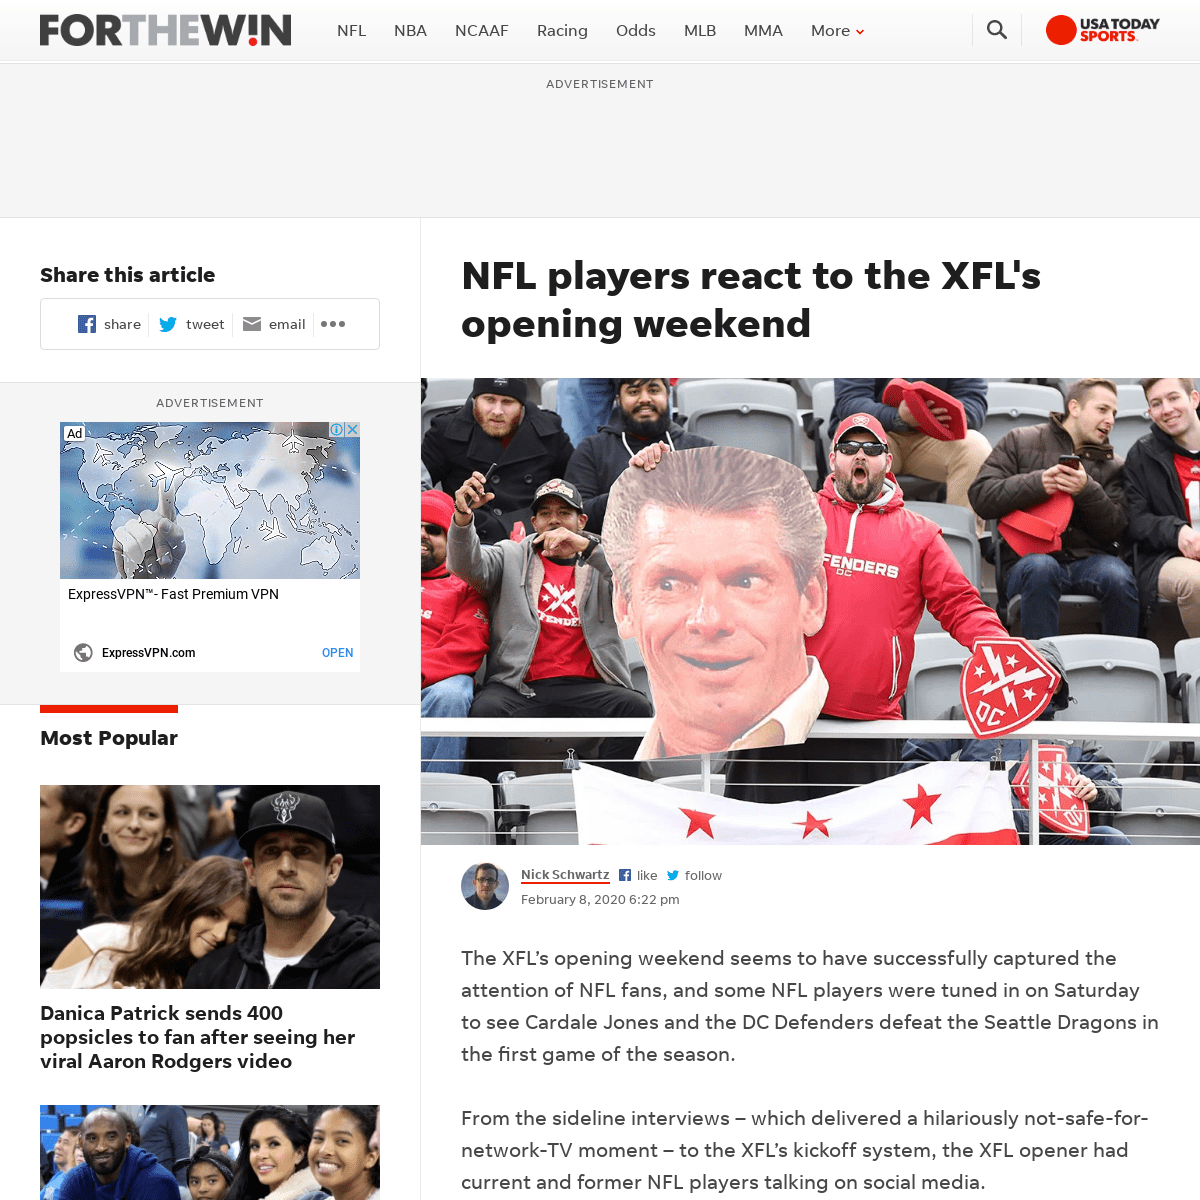 A complete backup of ftw.usatoday.com/2020/02/nfl-players-react-to-xfl